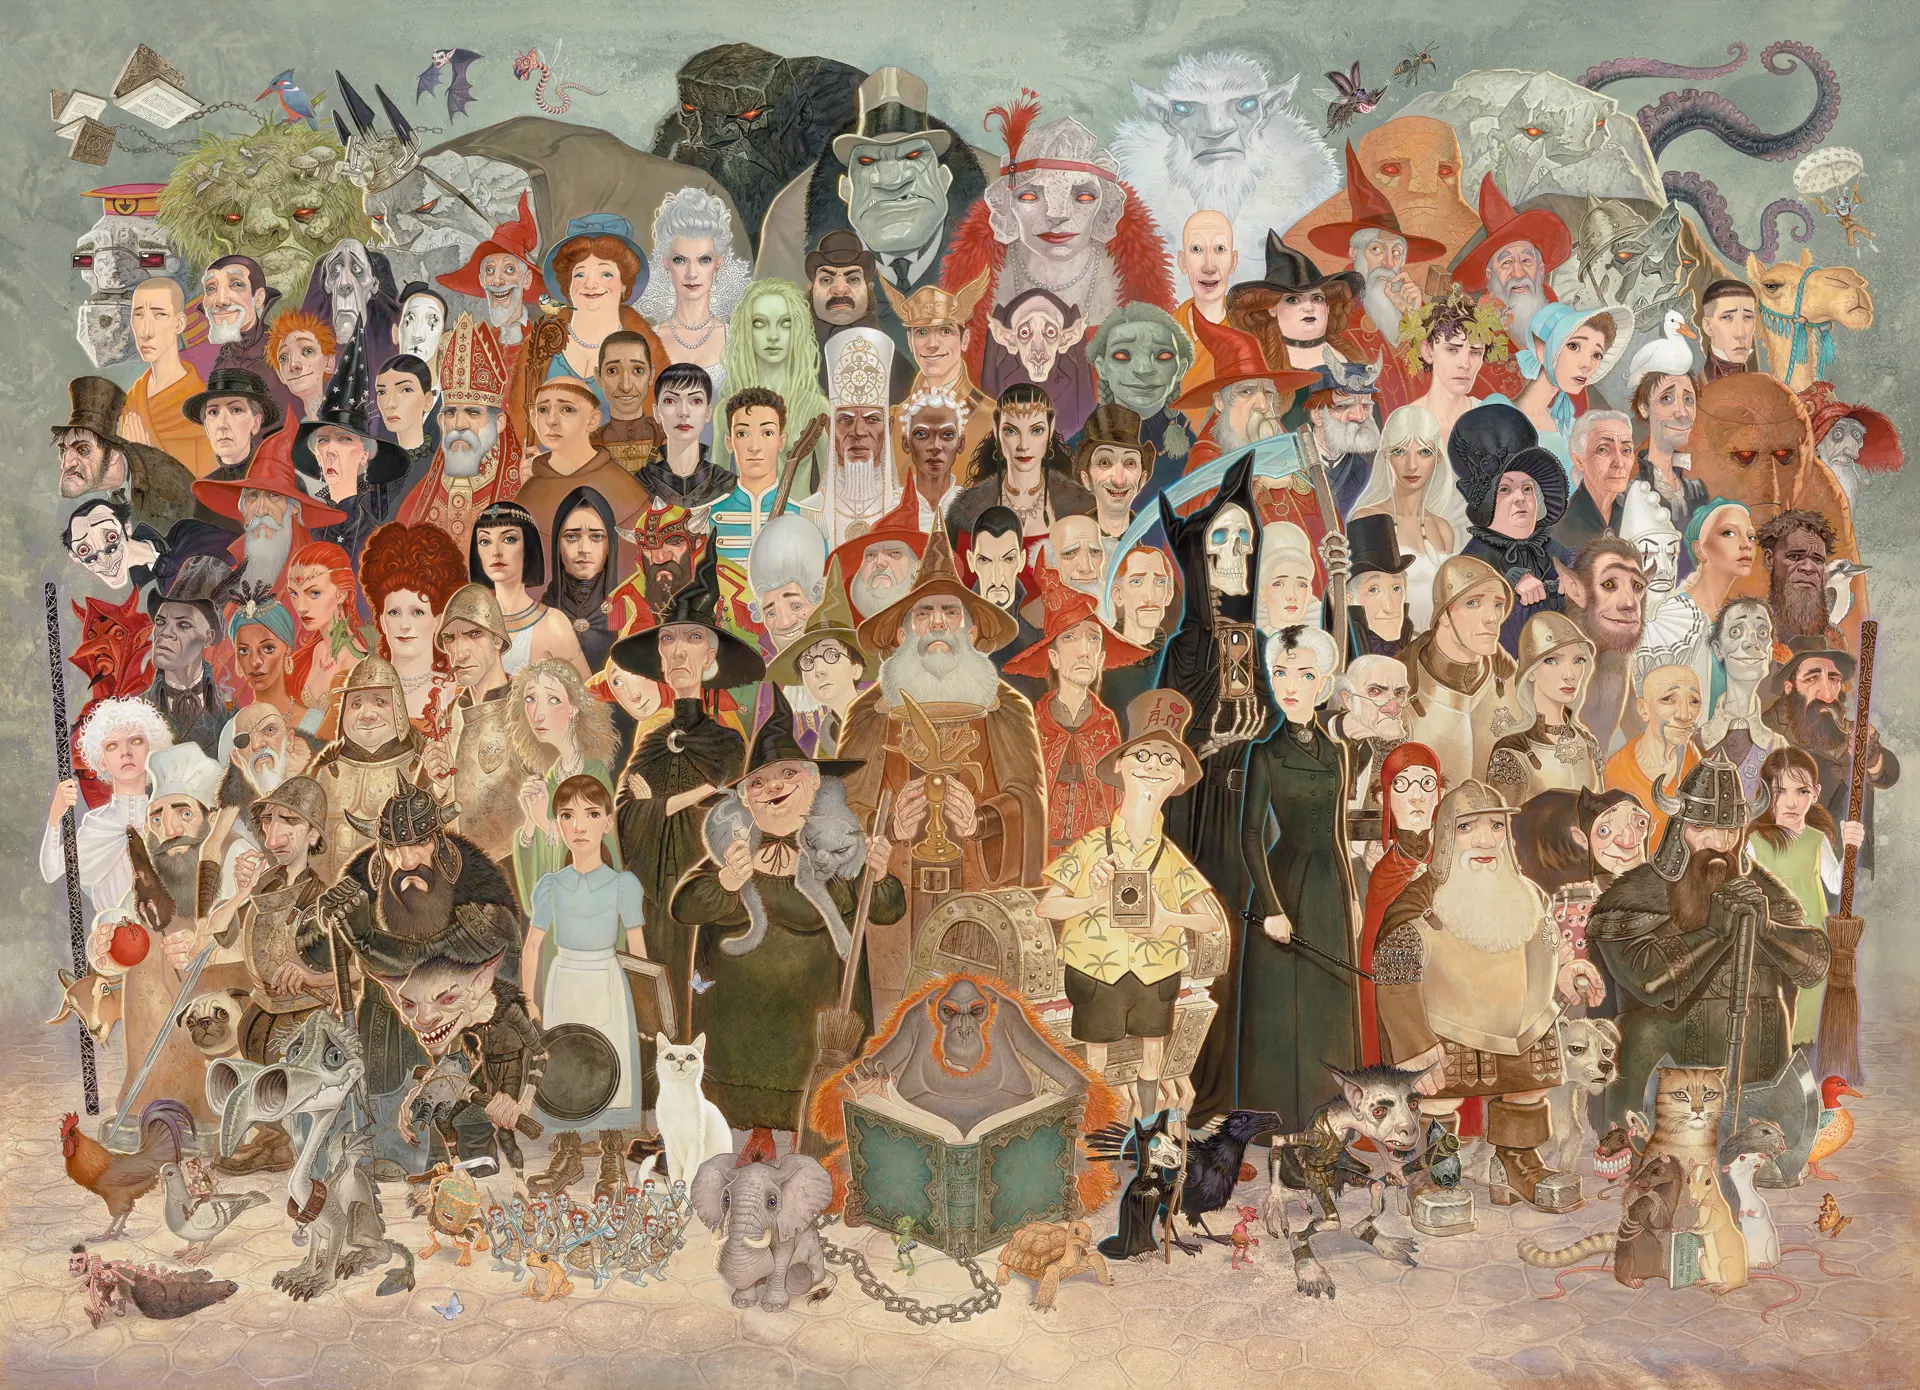 A mural of a bunch of Discworld characters all sitting together